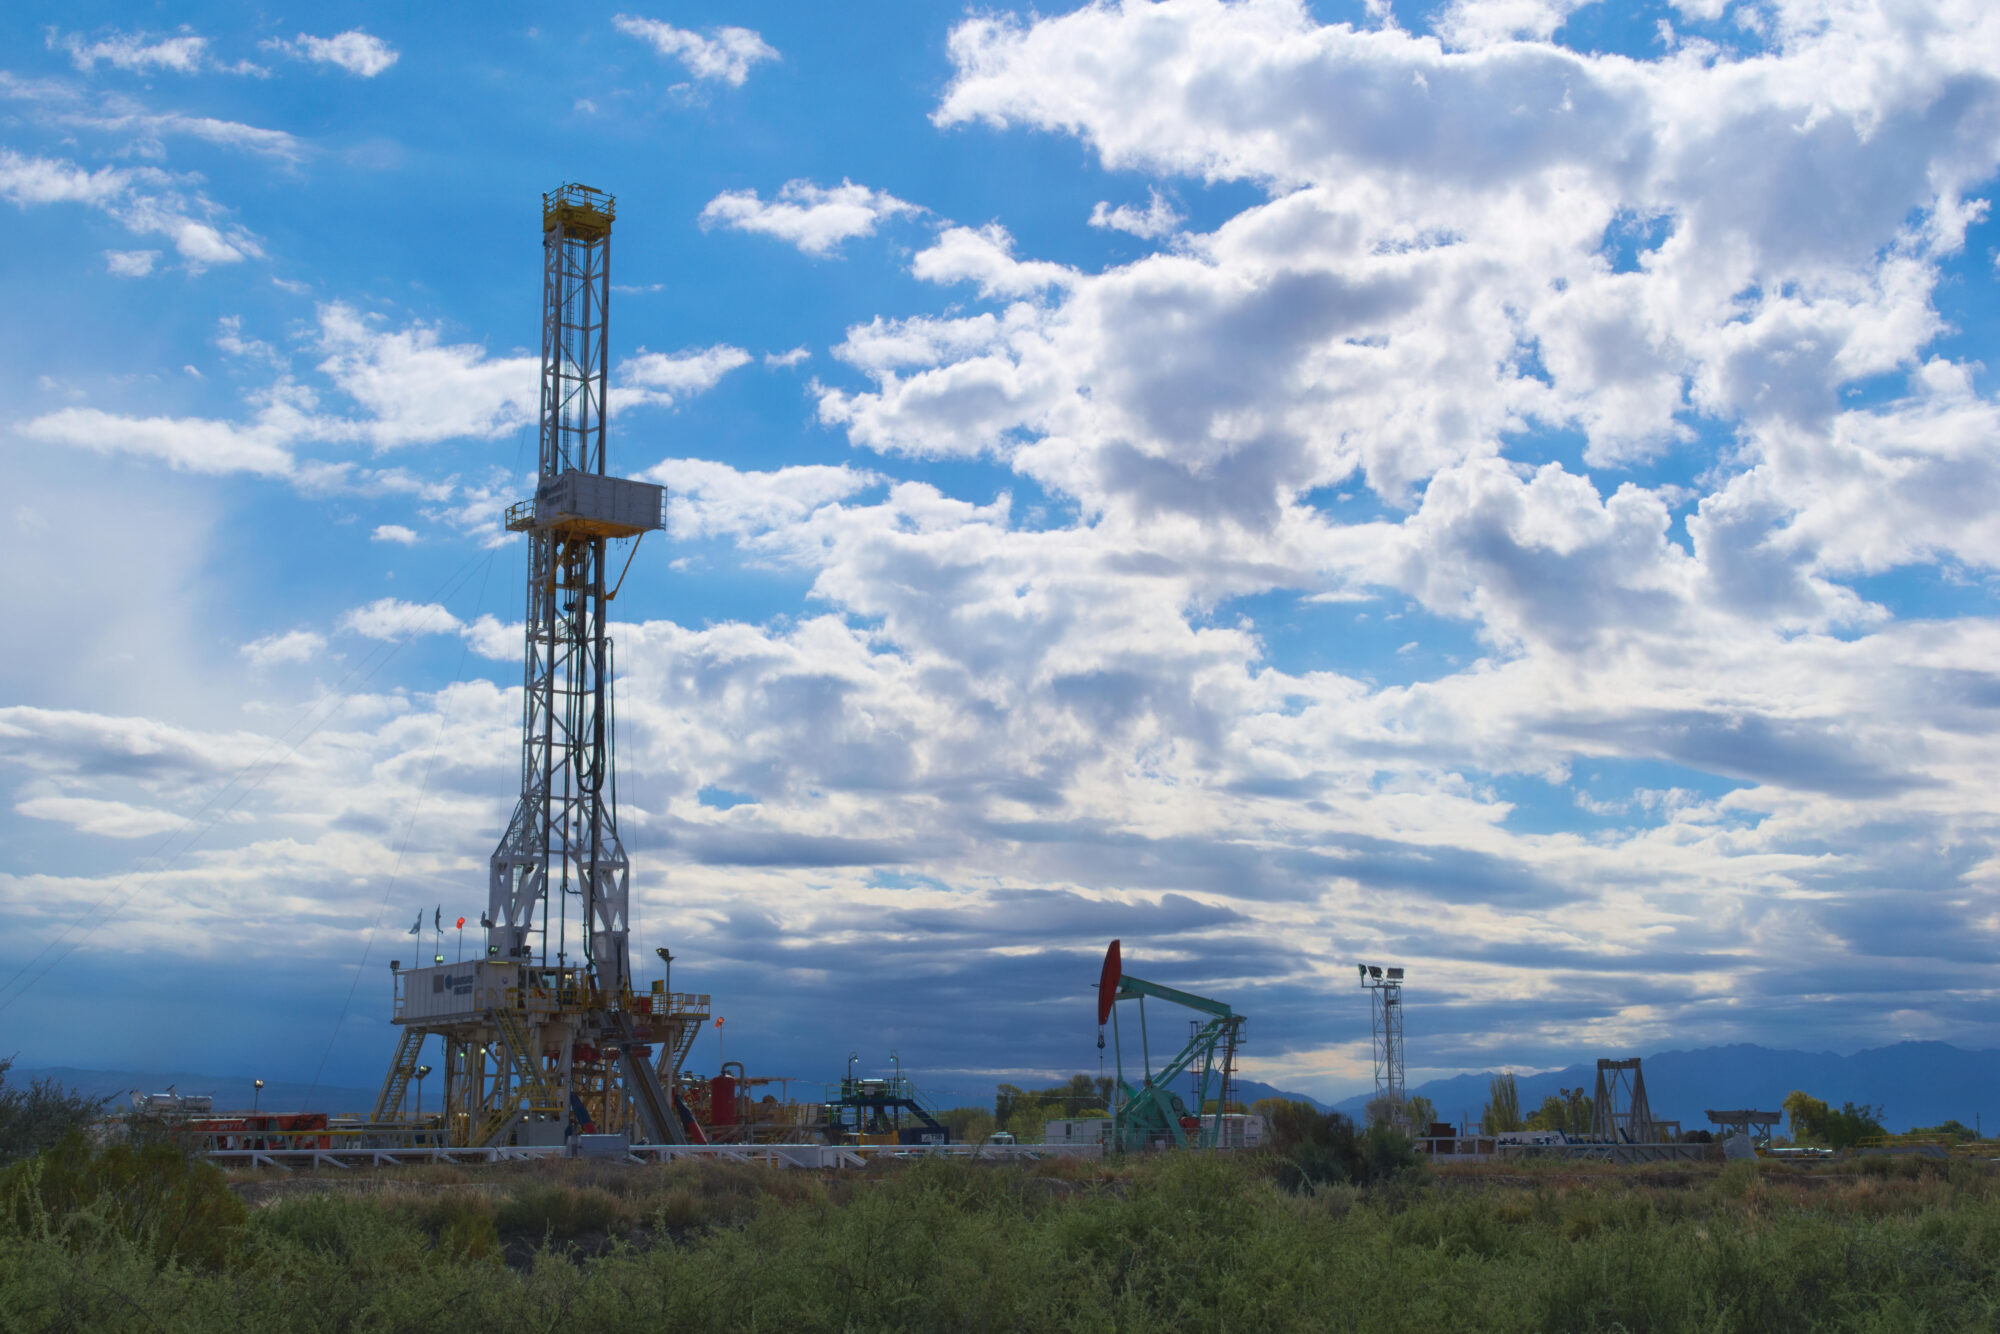 <p>An oil extraction facility in Mendoza, Argentina. &#8220;Developing gas will allow us to stop importing liquid fuels, and to export it to countries with polluting energy mixes,&#8221; Nicolini said. (Image: Hernan Schmidt / Alamy)</p>